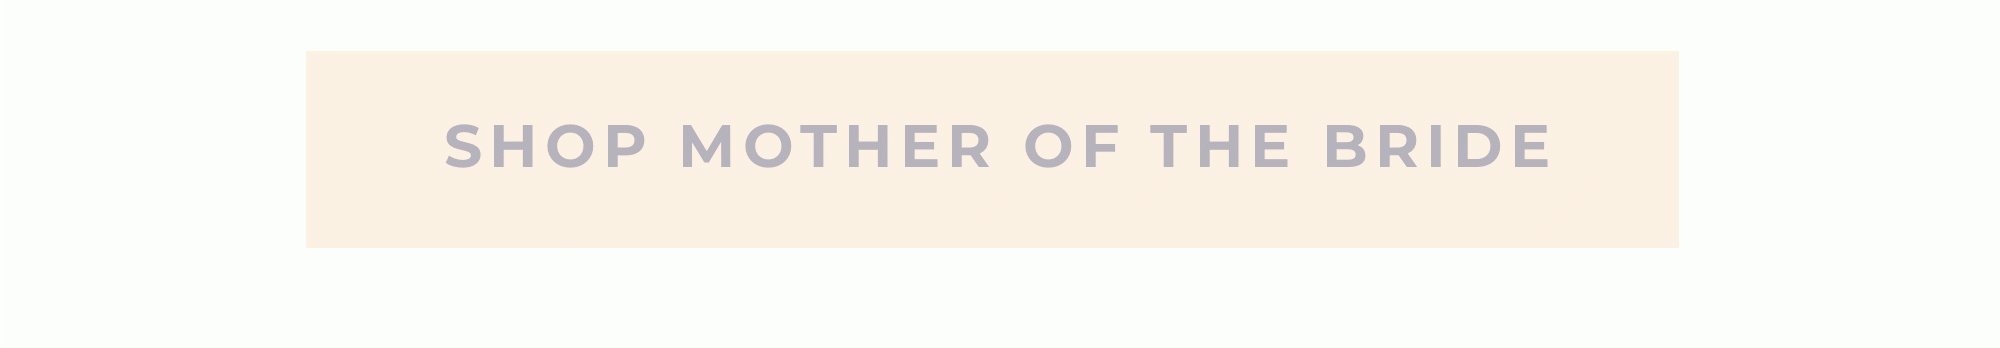 shop mother of the bride